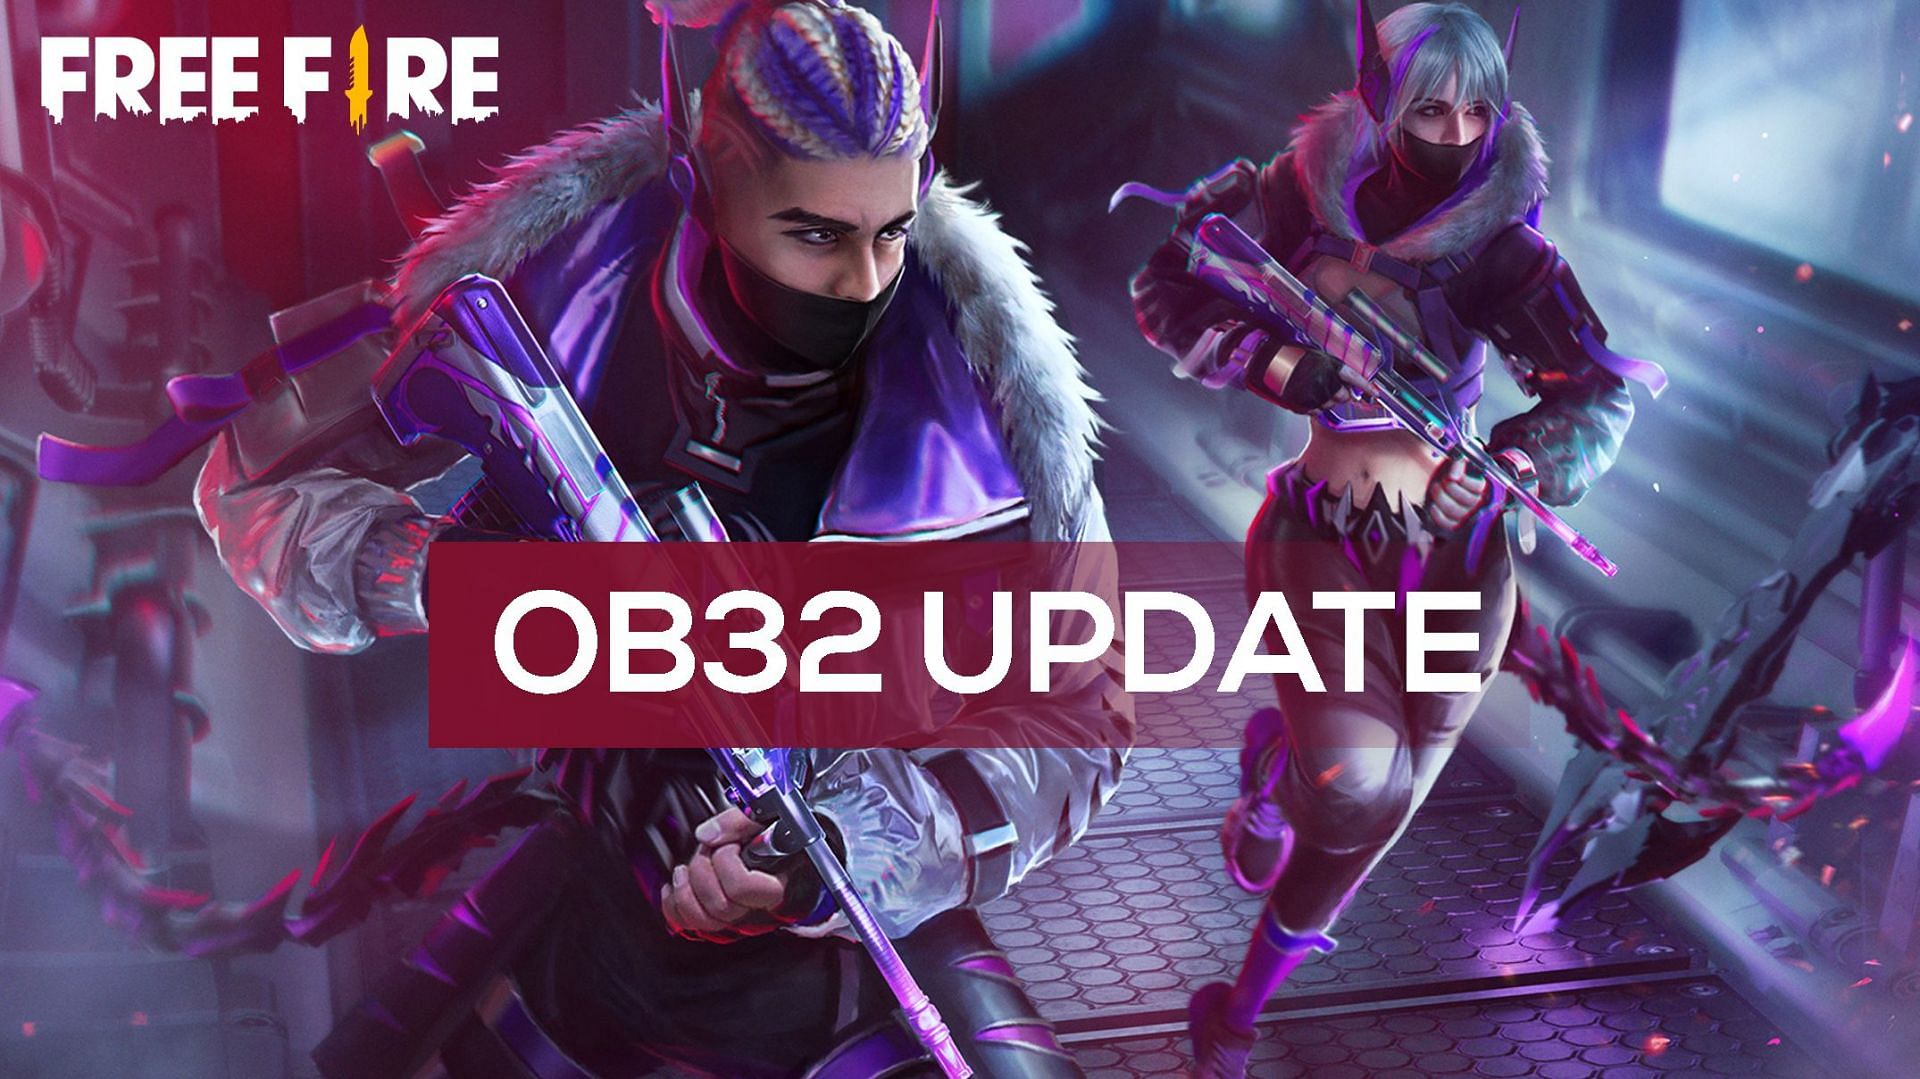 OB32 update is the next big thing in Free Fire (Image via Free Fire)